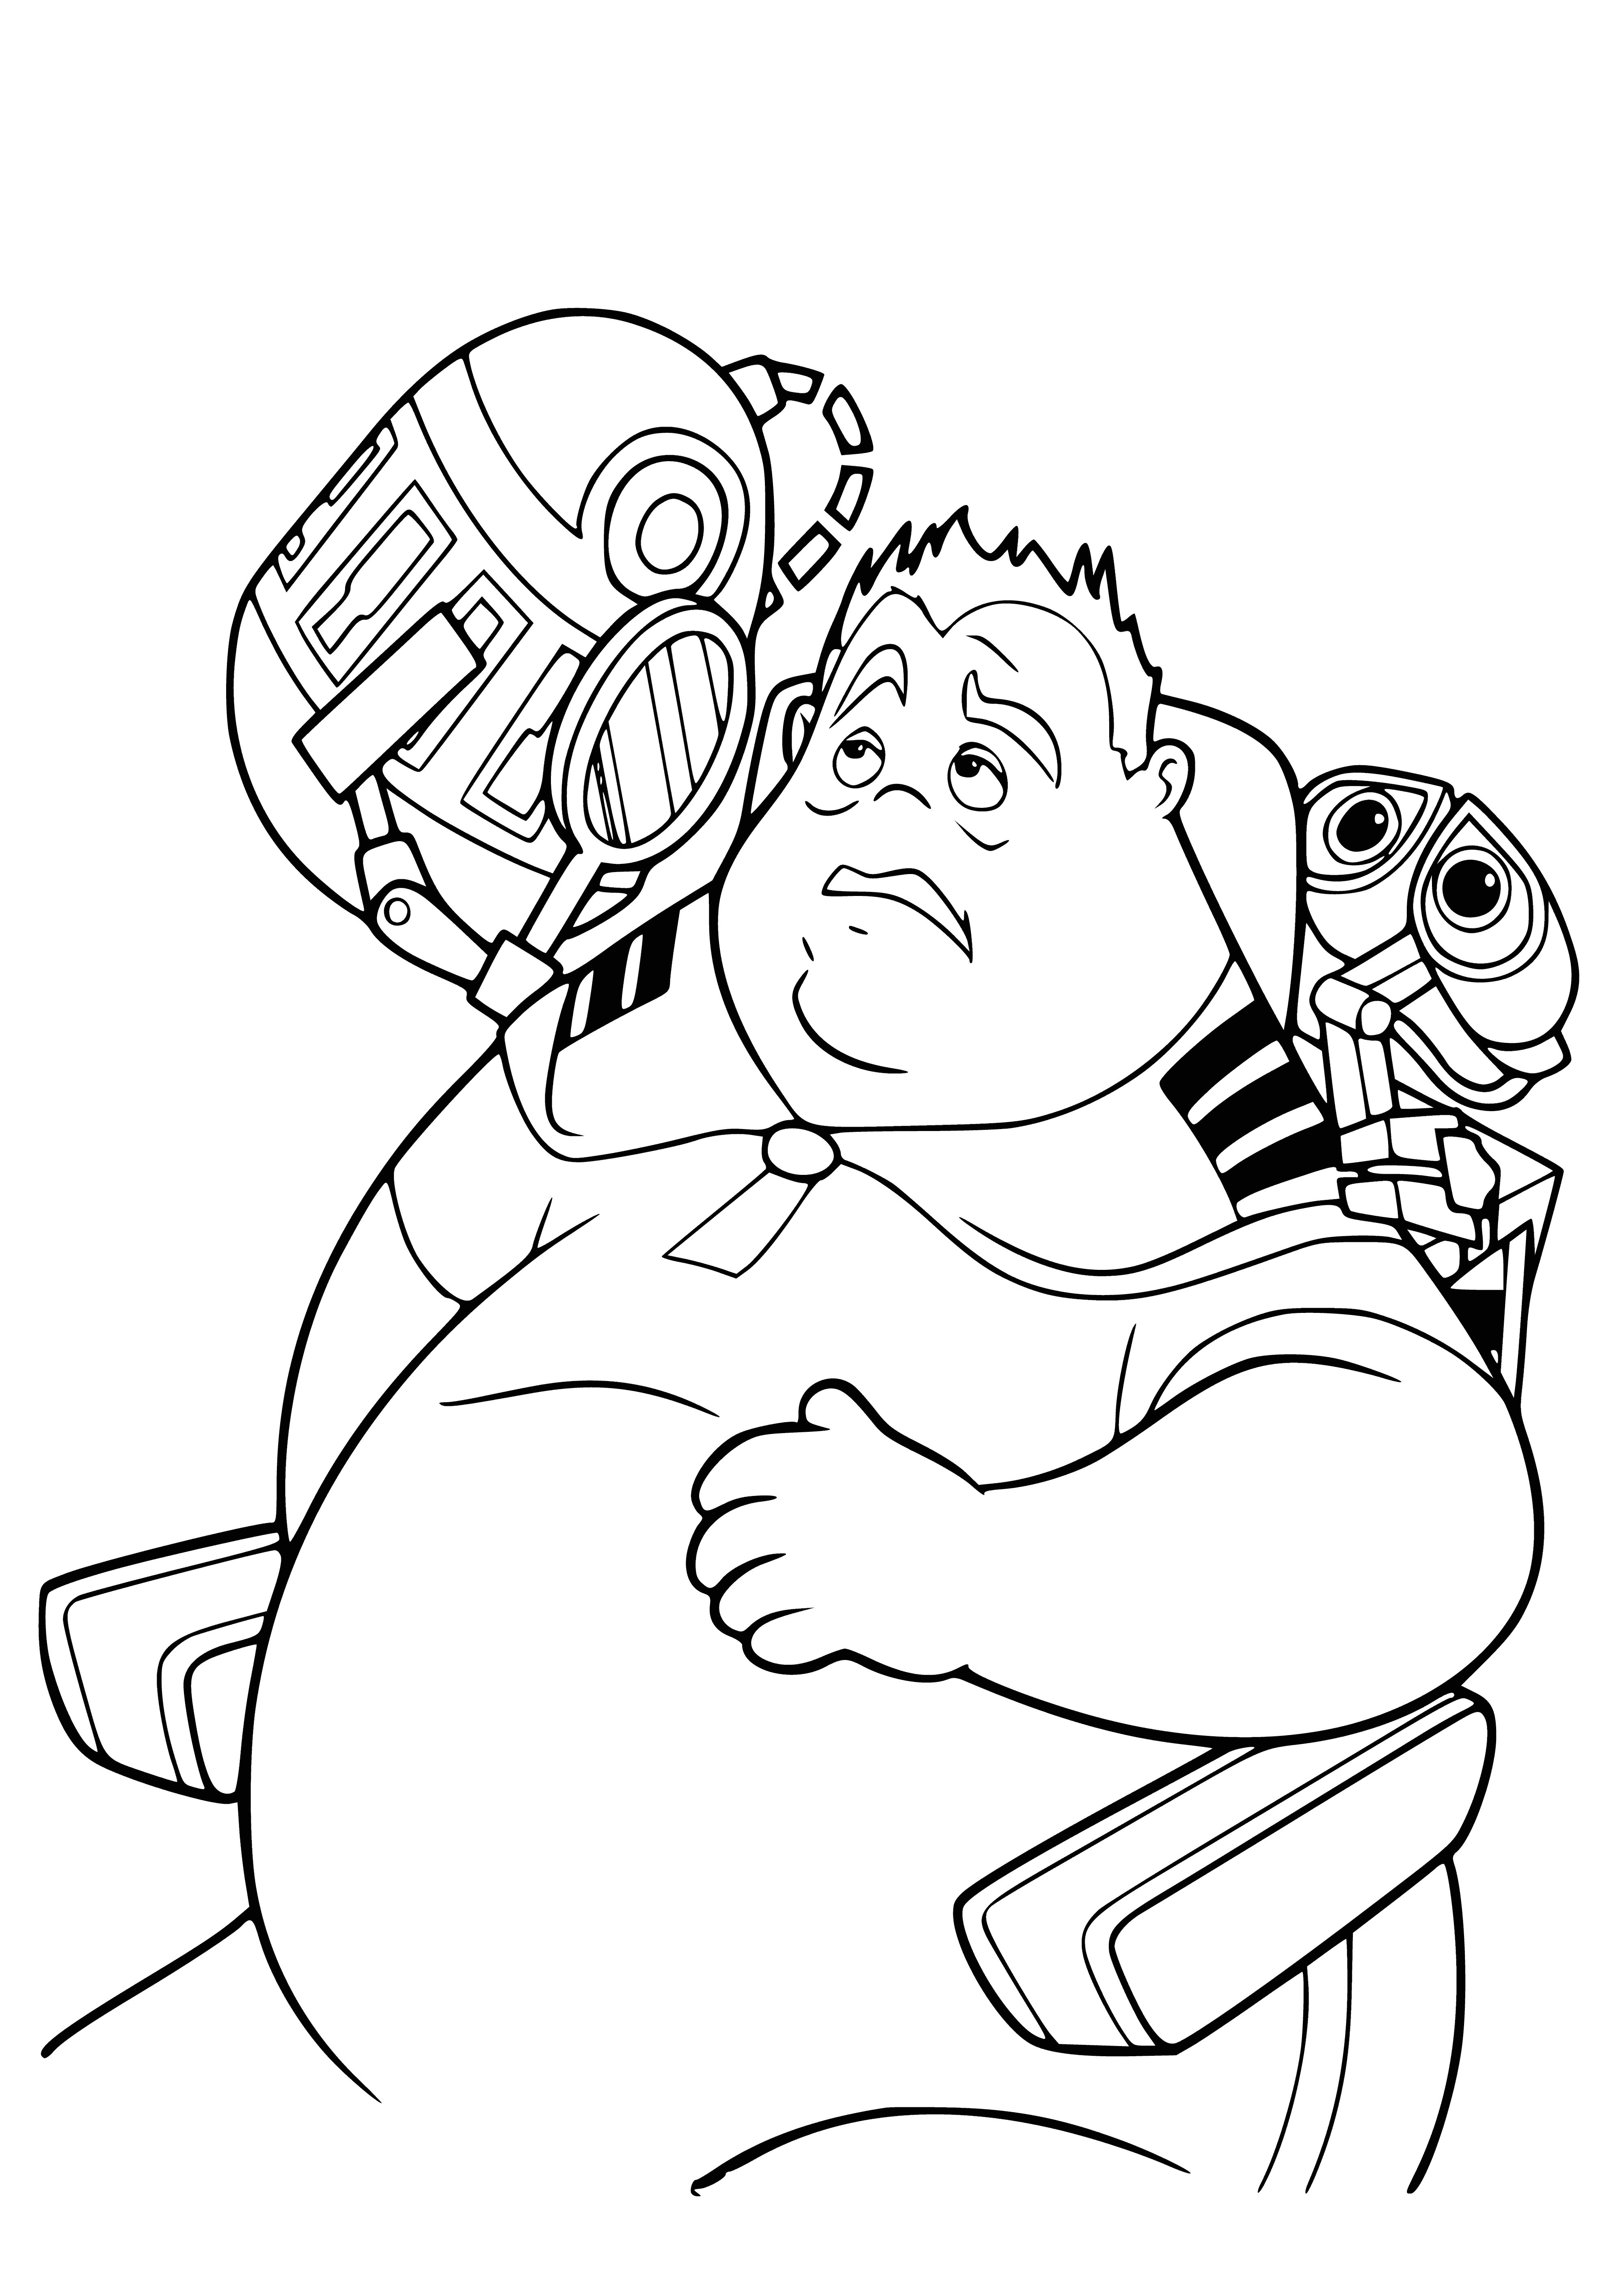 Robots and captain coloring page